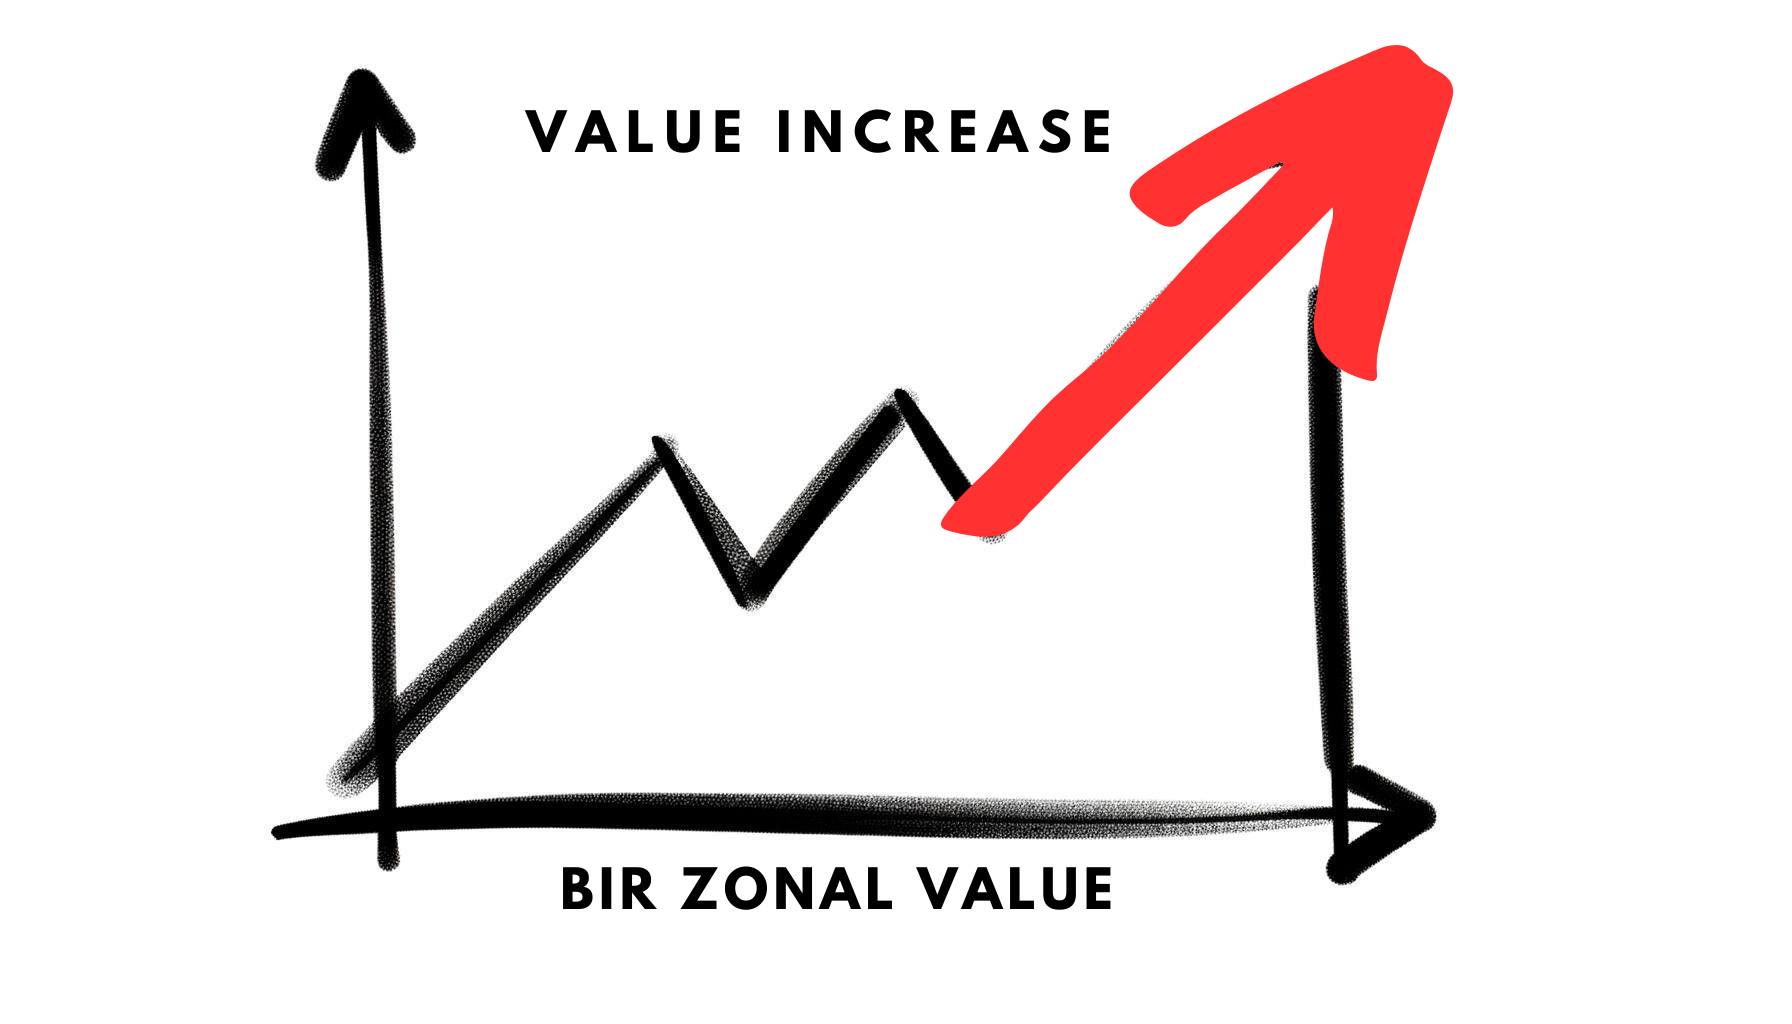 Brace Yourself! Up To 184% BIR Zonal Value Increase Recently!